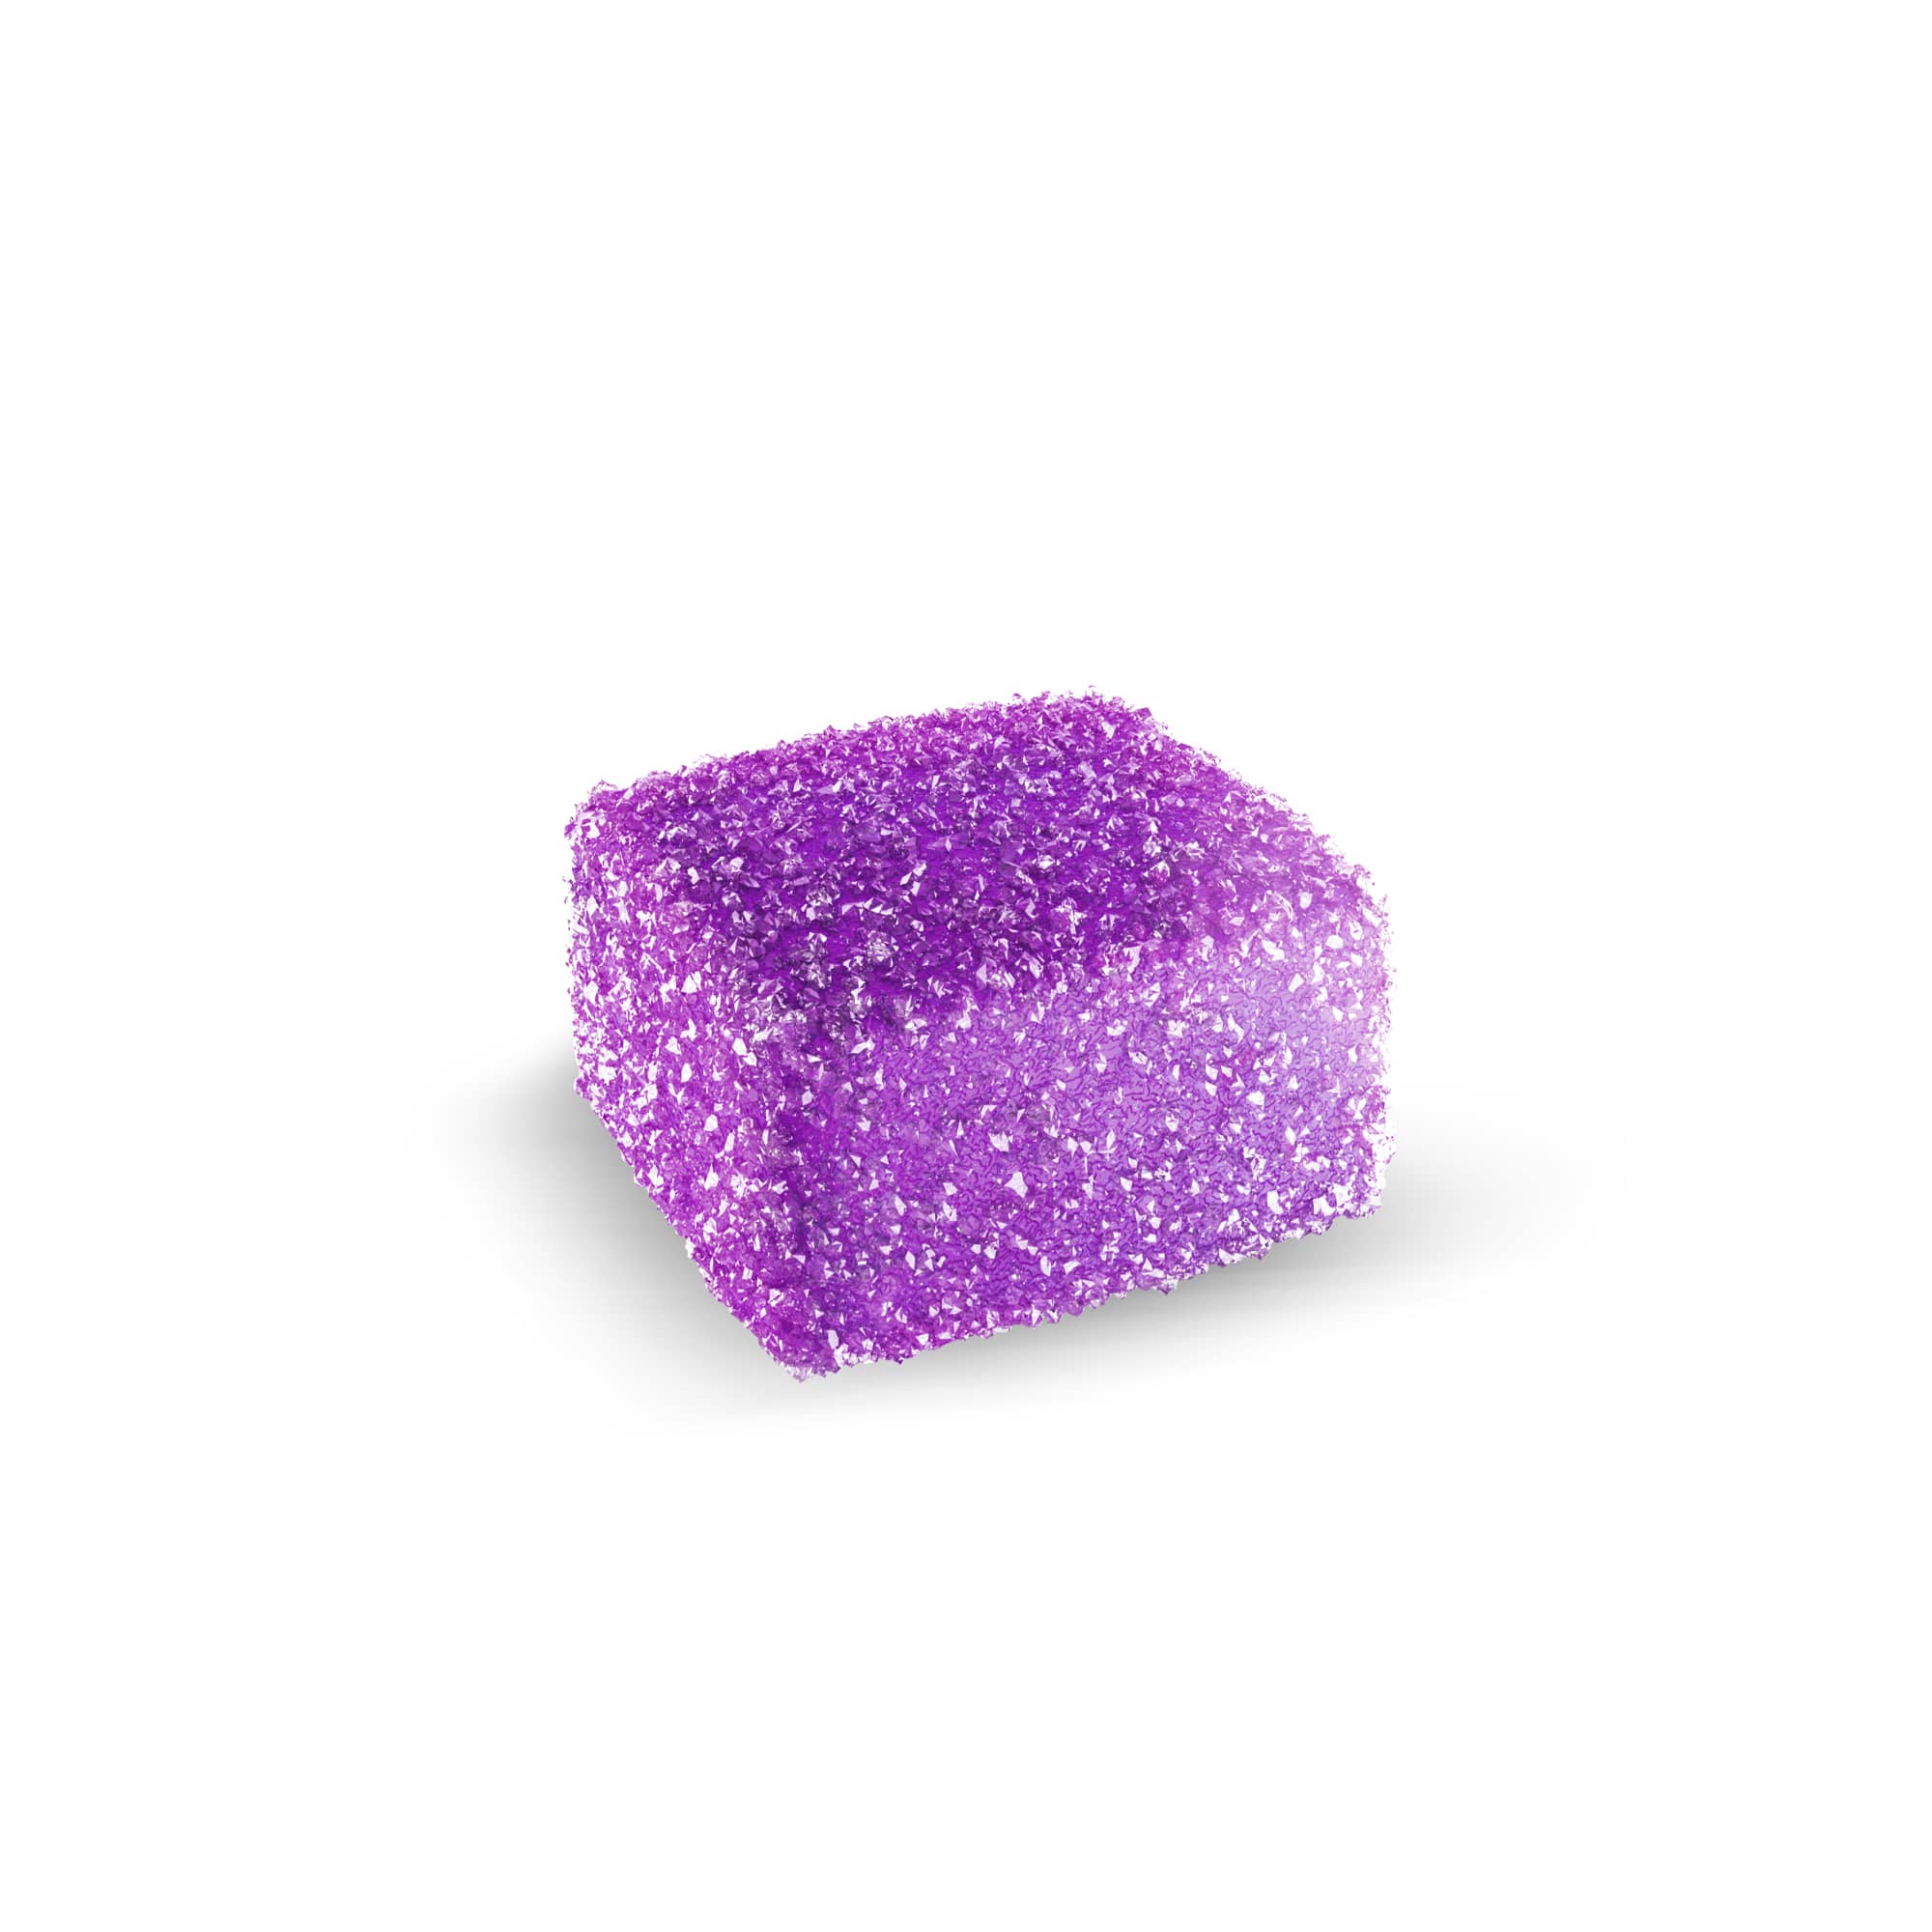 Infused by LEVO Unwind Gummies blackberry flavored for rest. Single gummies.